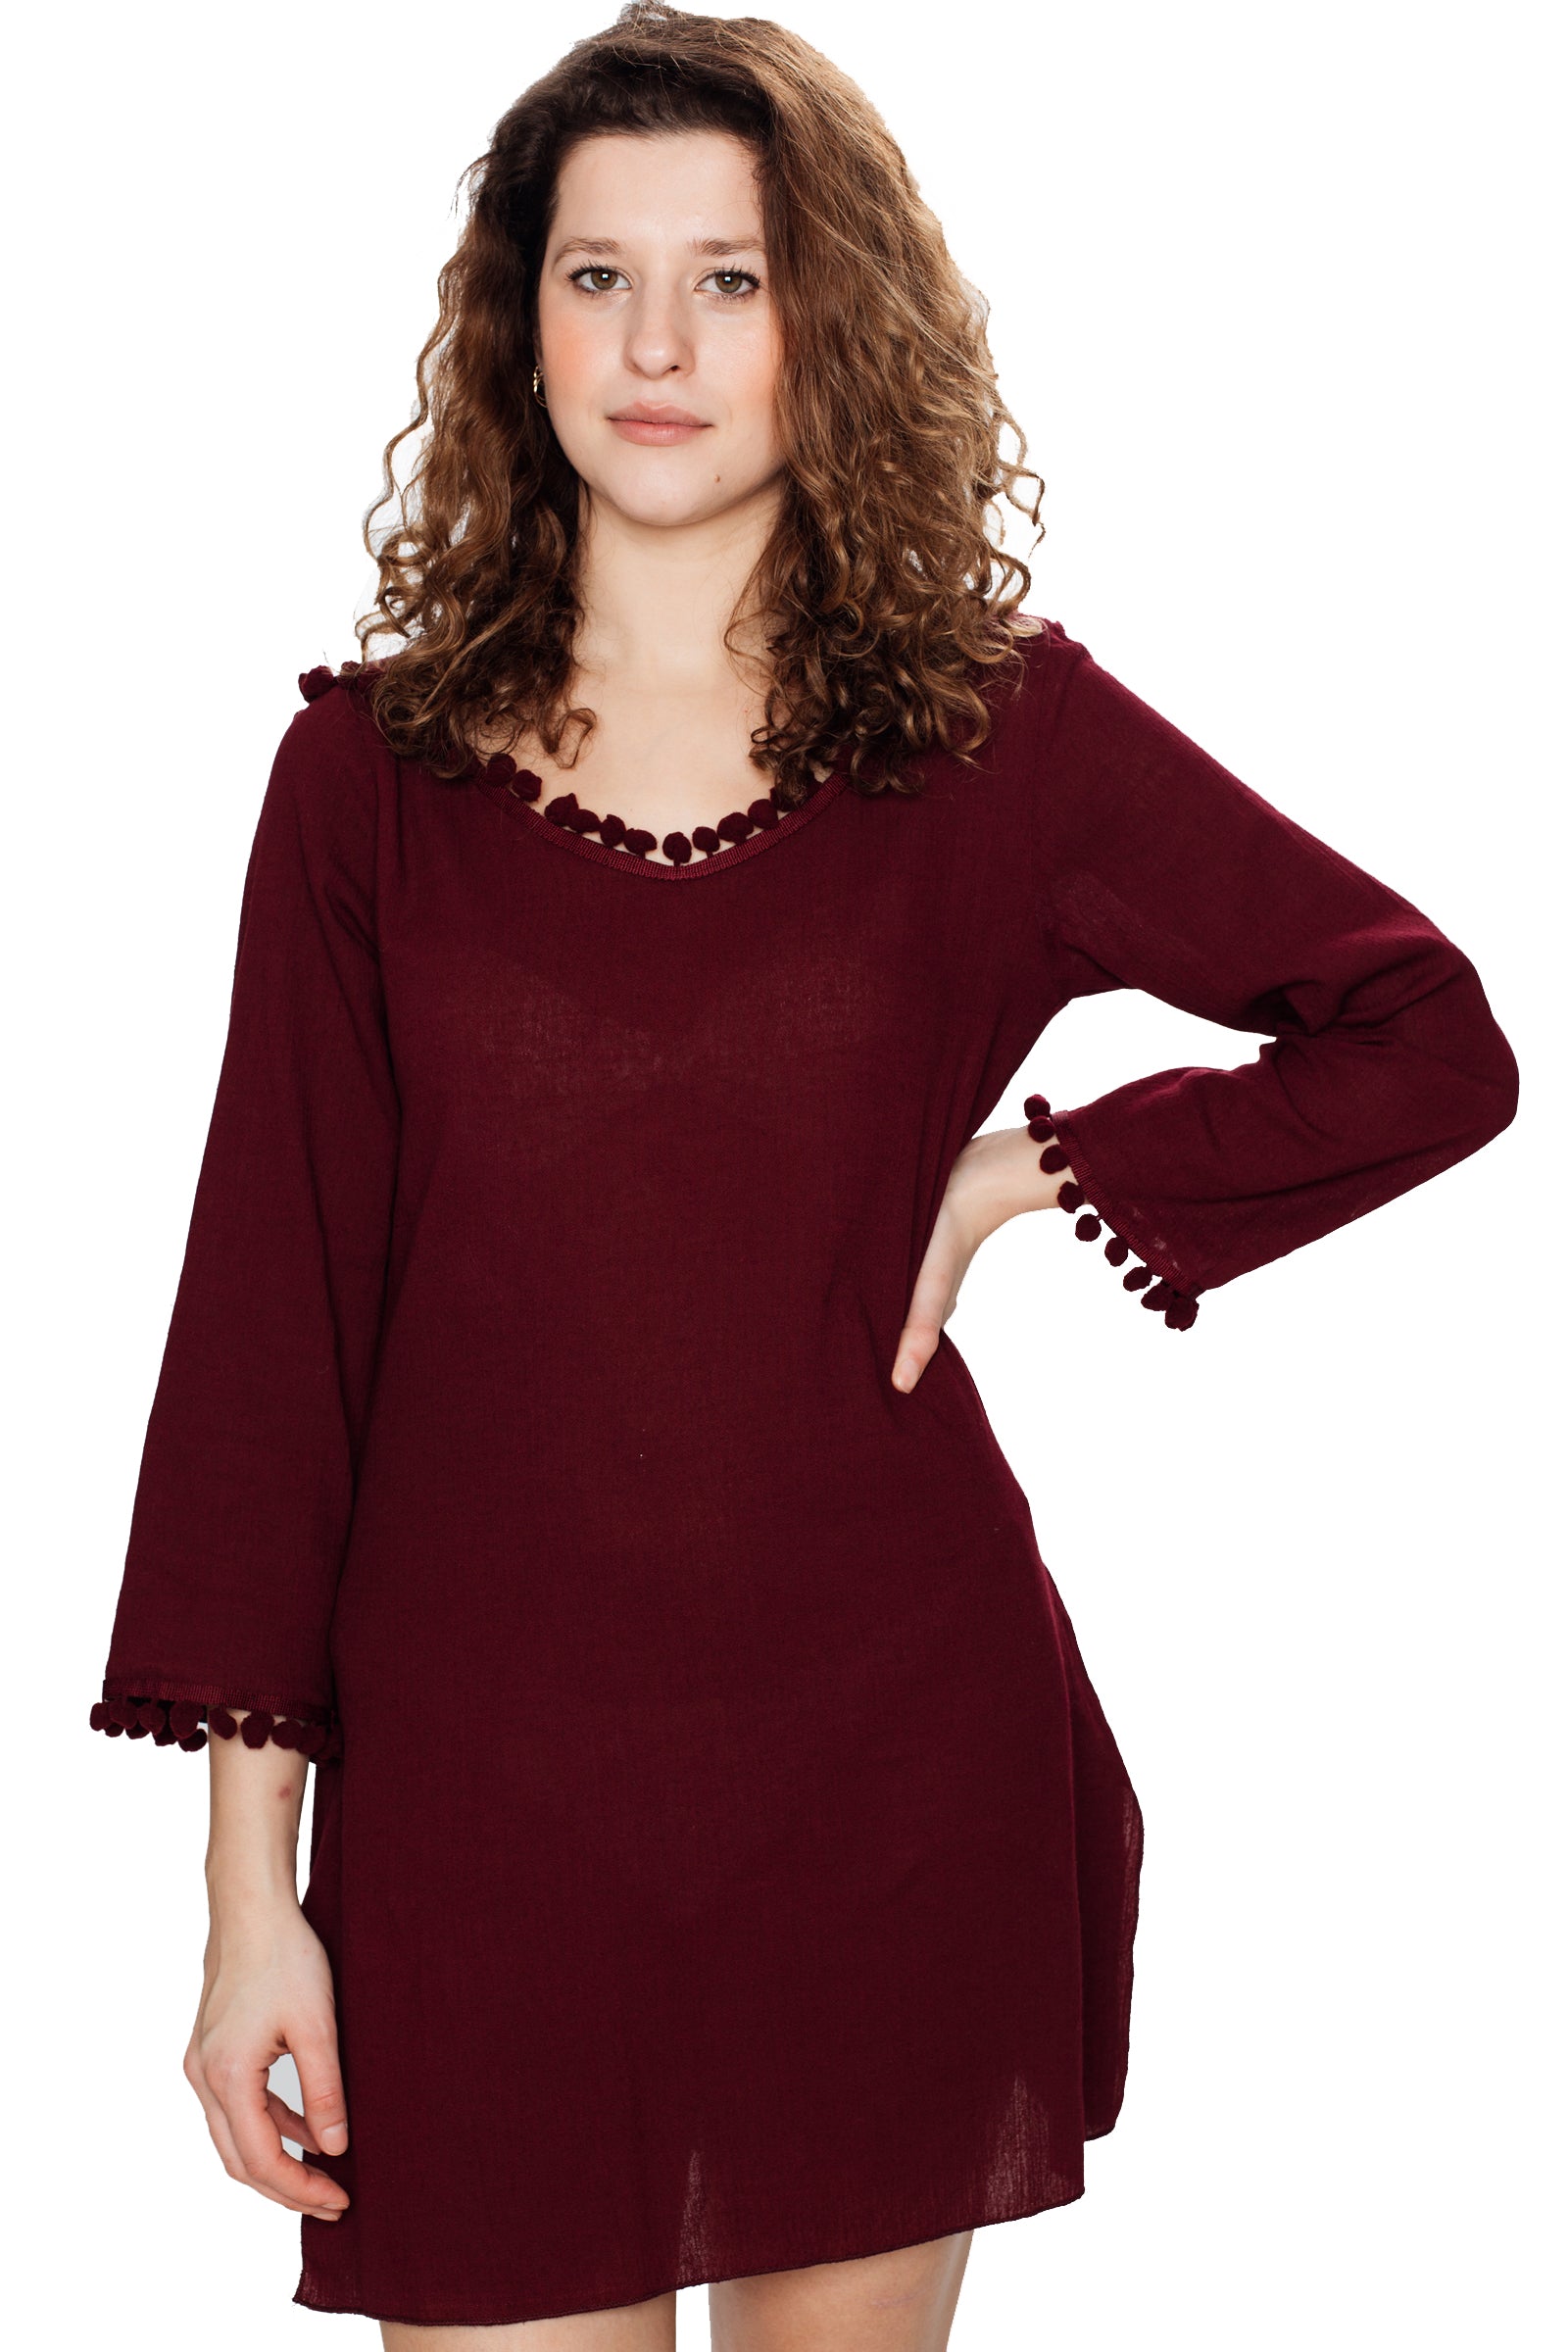 Burgundy Hooded Long Sleeve Cotton Coverup